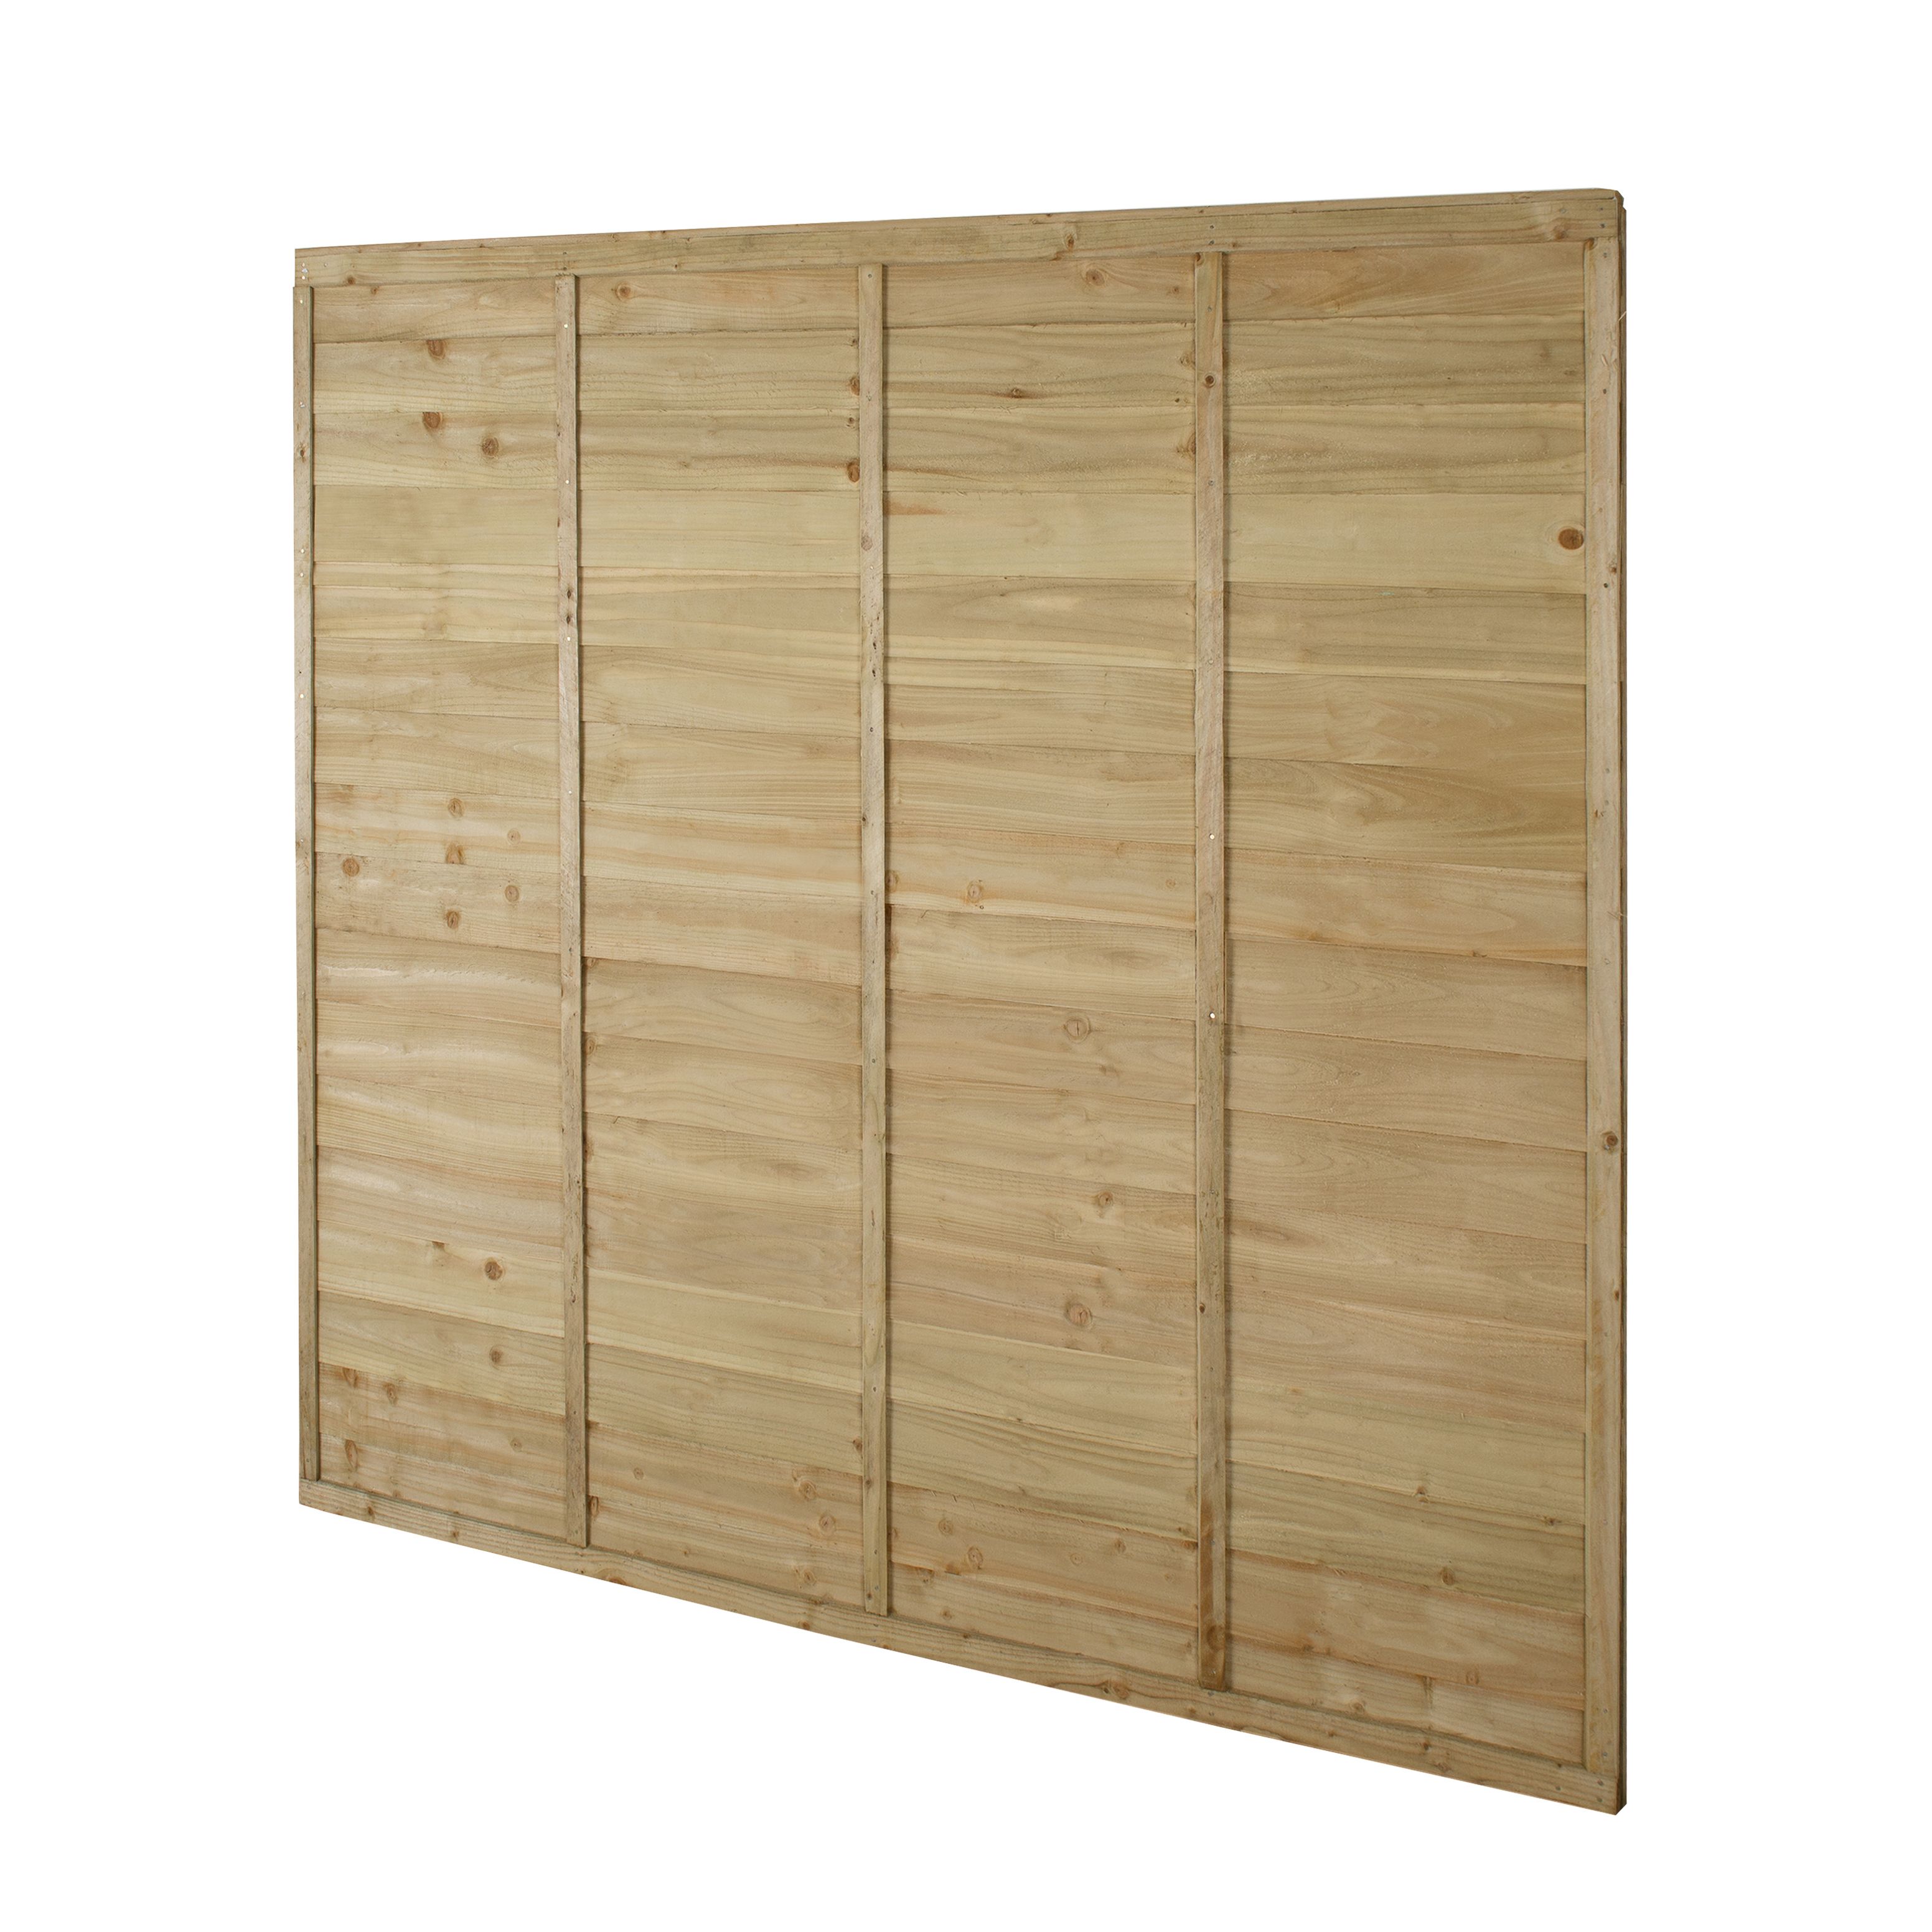 Premier Overlap Pressure treated 6ft Wooden Fence panel (W)1.83m (H)1.83m, Pack of 5